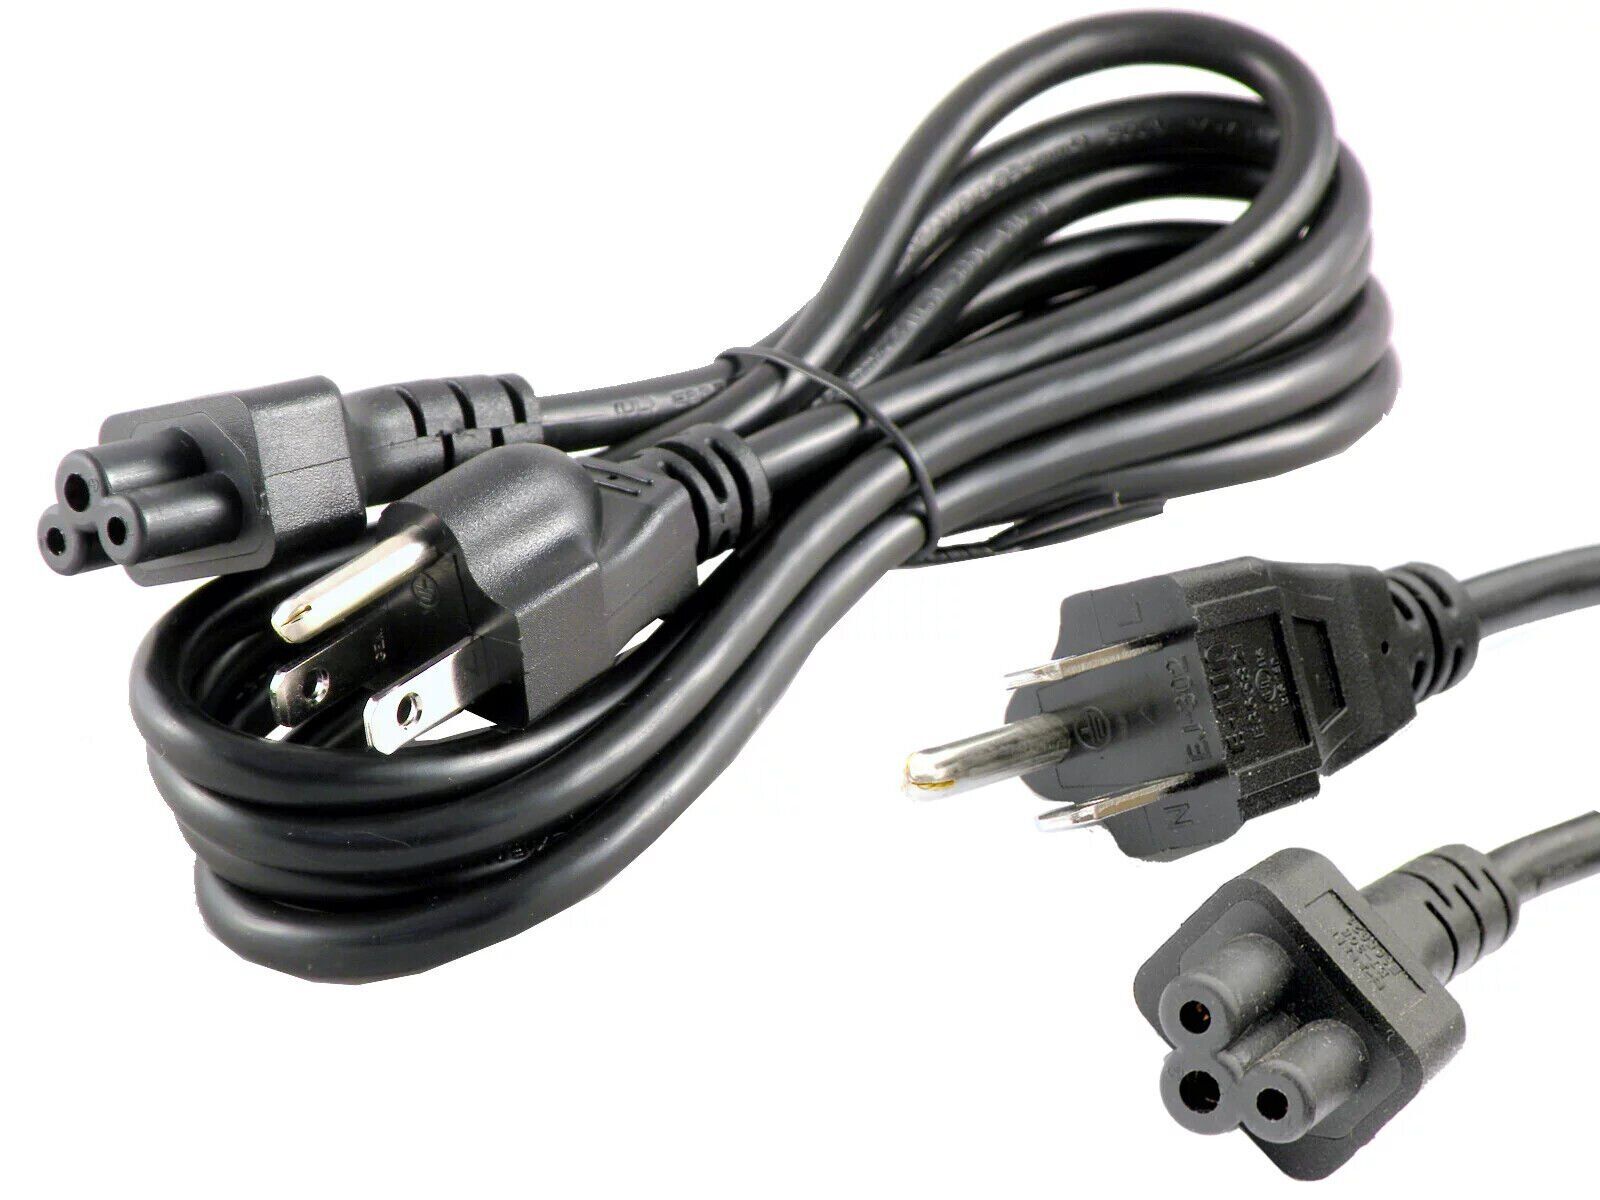 Lot of 10 6ft 3-Prong Mickey Mouse AC Power Cord Cable Laptop PC Printers Charge